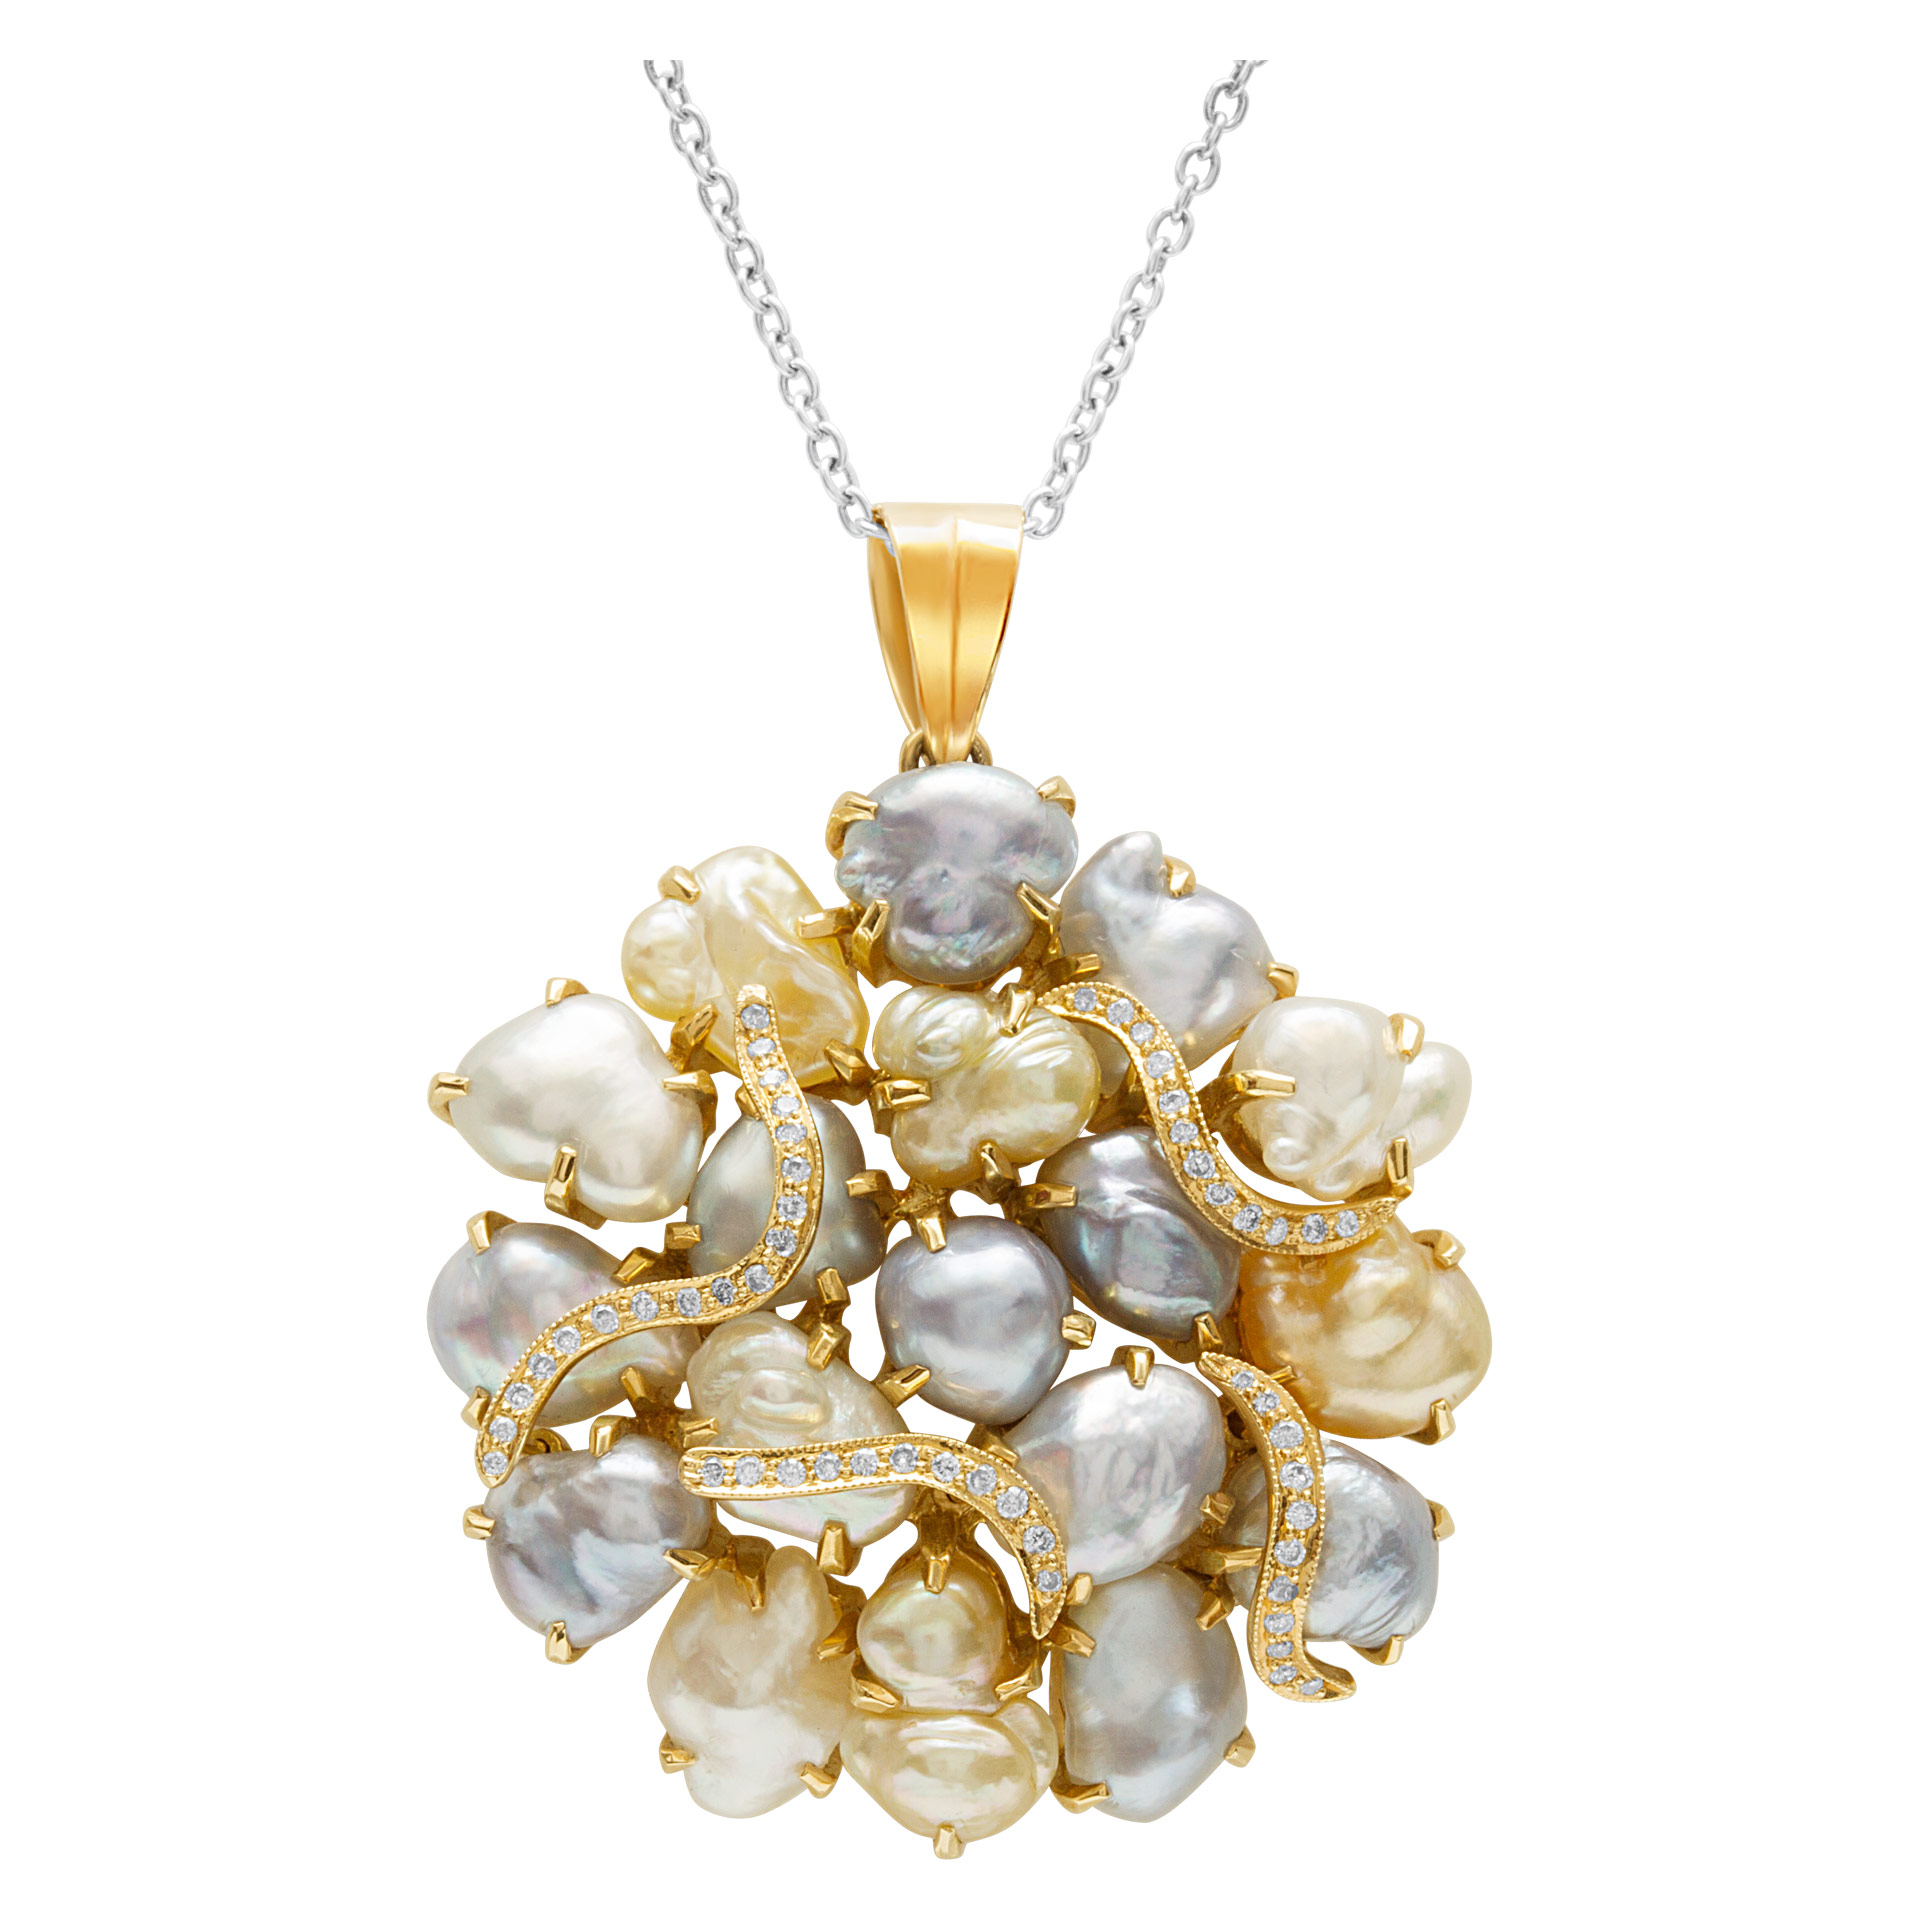 Pearl pendant with 0.95 cts in diamond accents